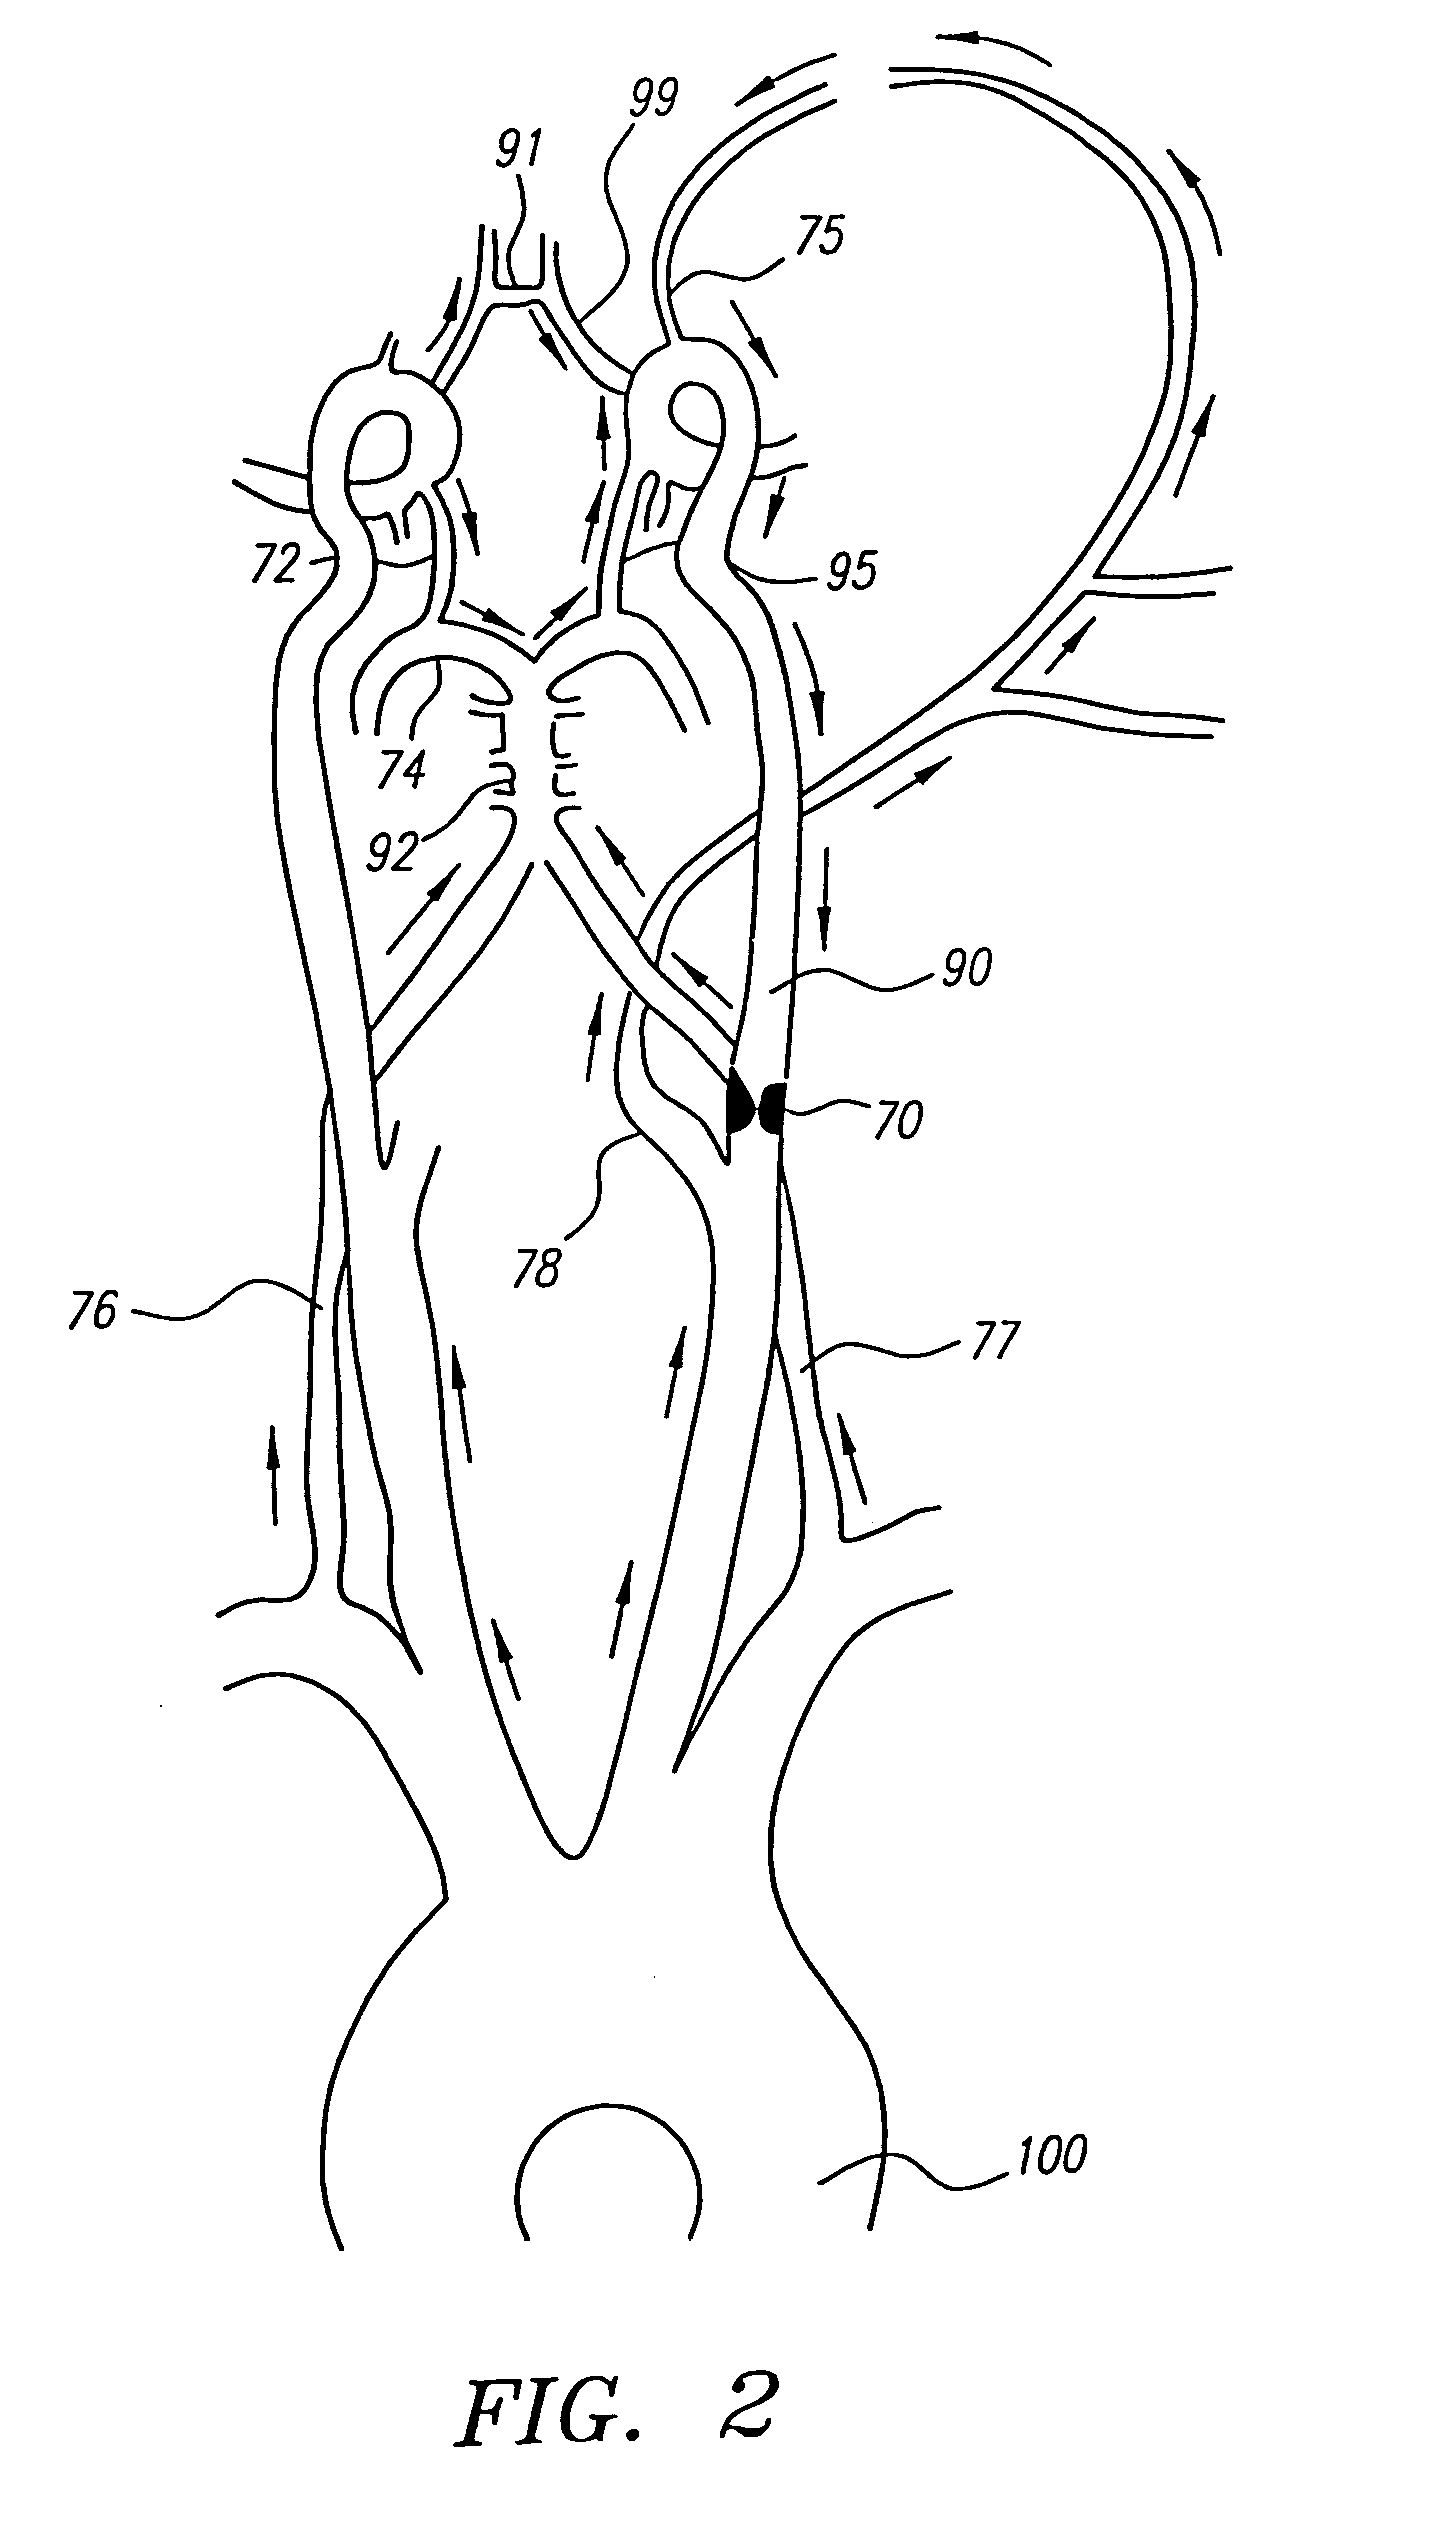 Devices and methods for preventing distal embolization during interventional procedures